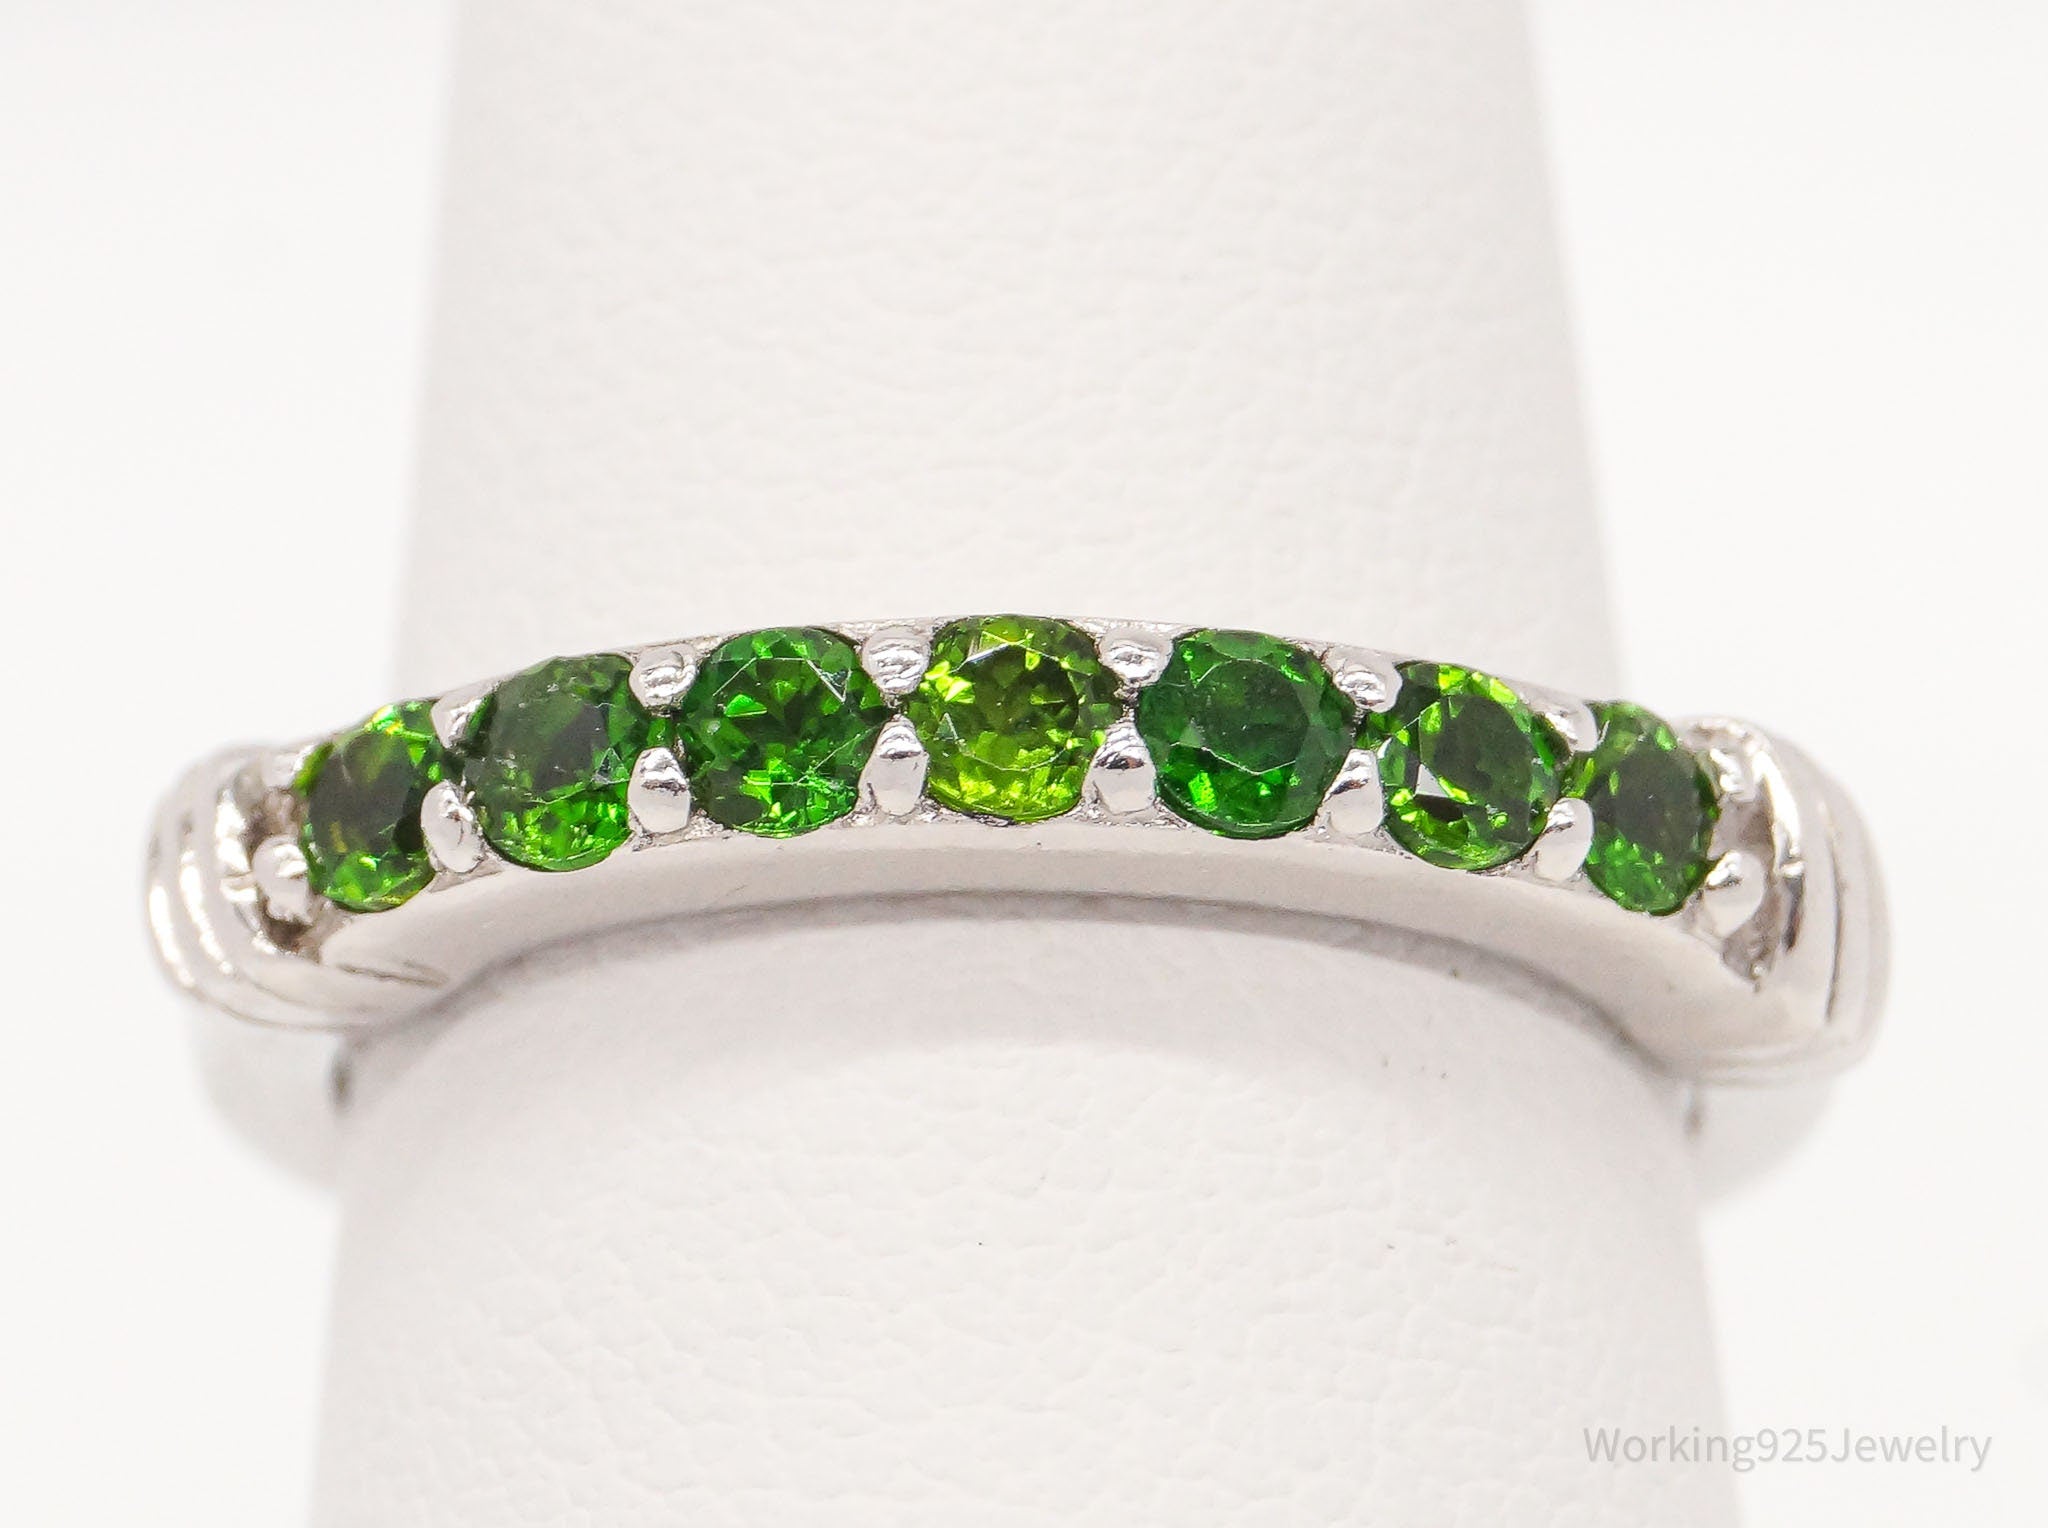 Vintage Peridot Sterling Silver Ring - Size 6